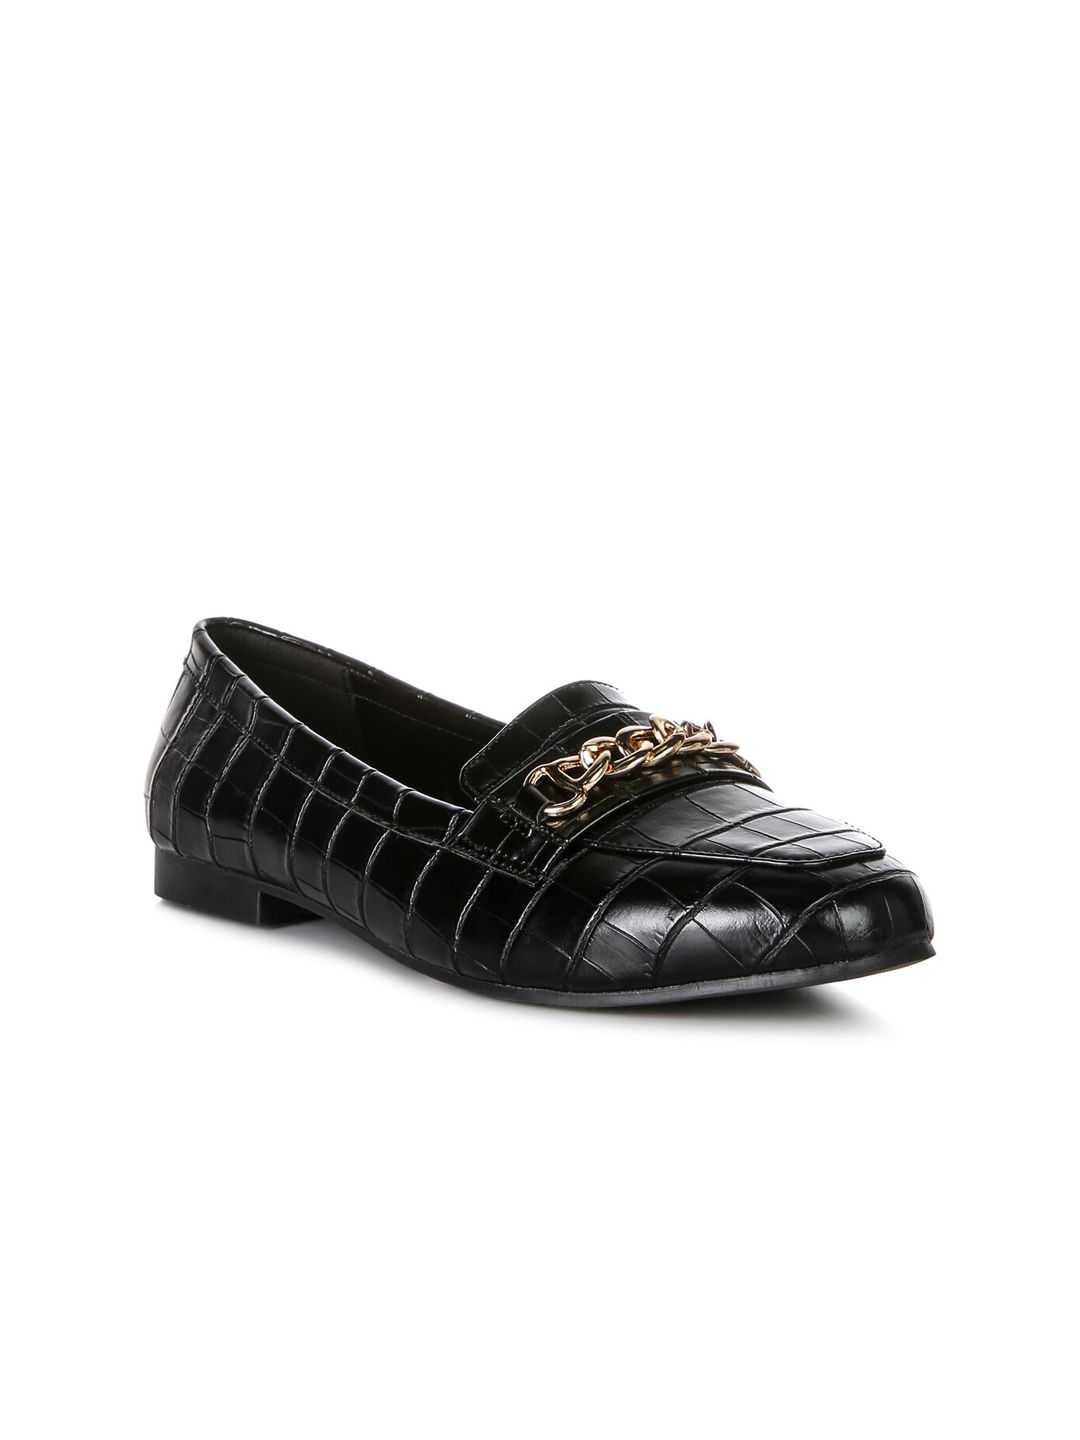 London Rag Women Textured Embellished Loafers Price in India